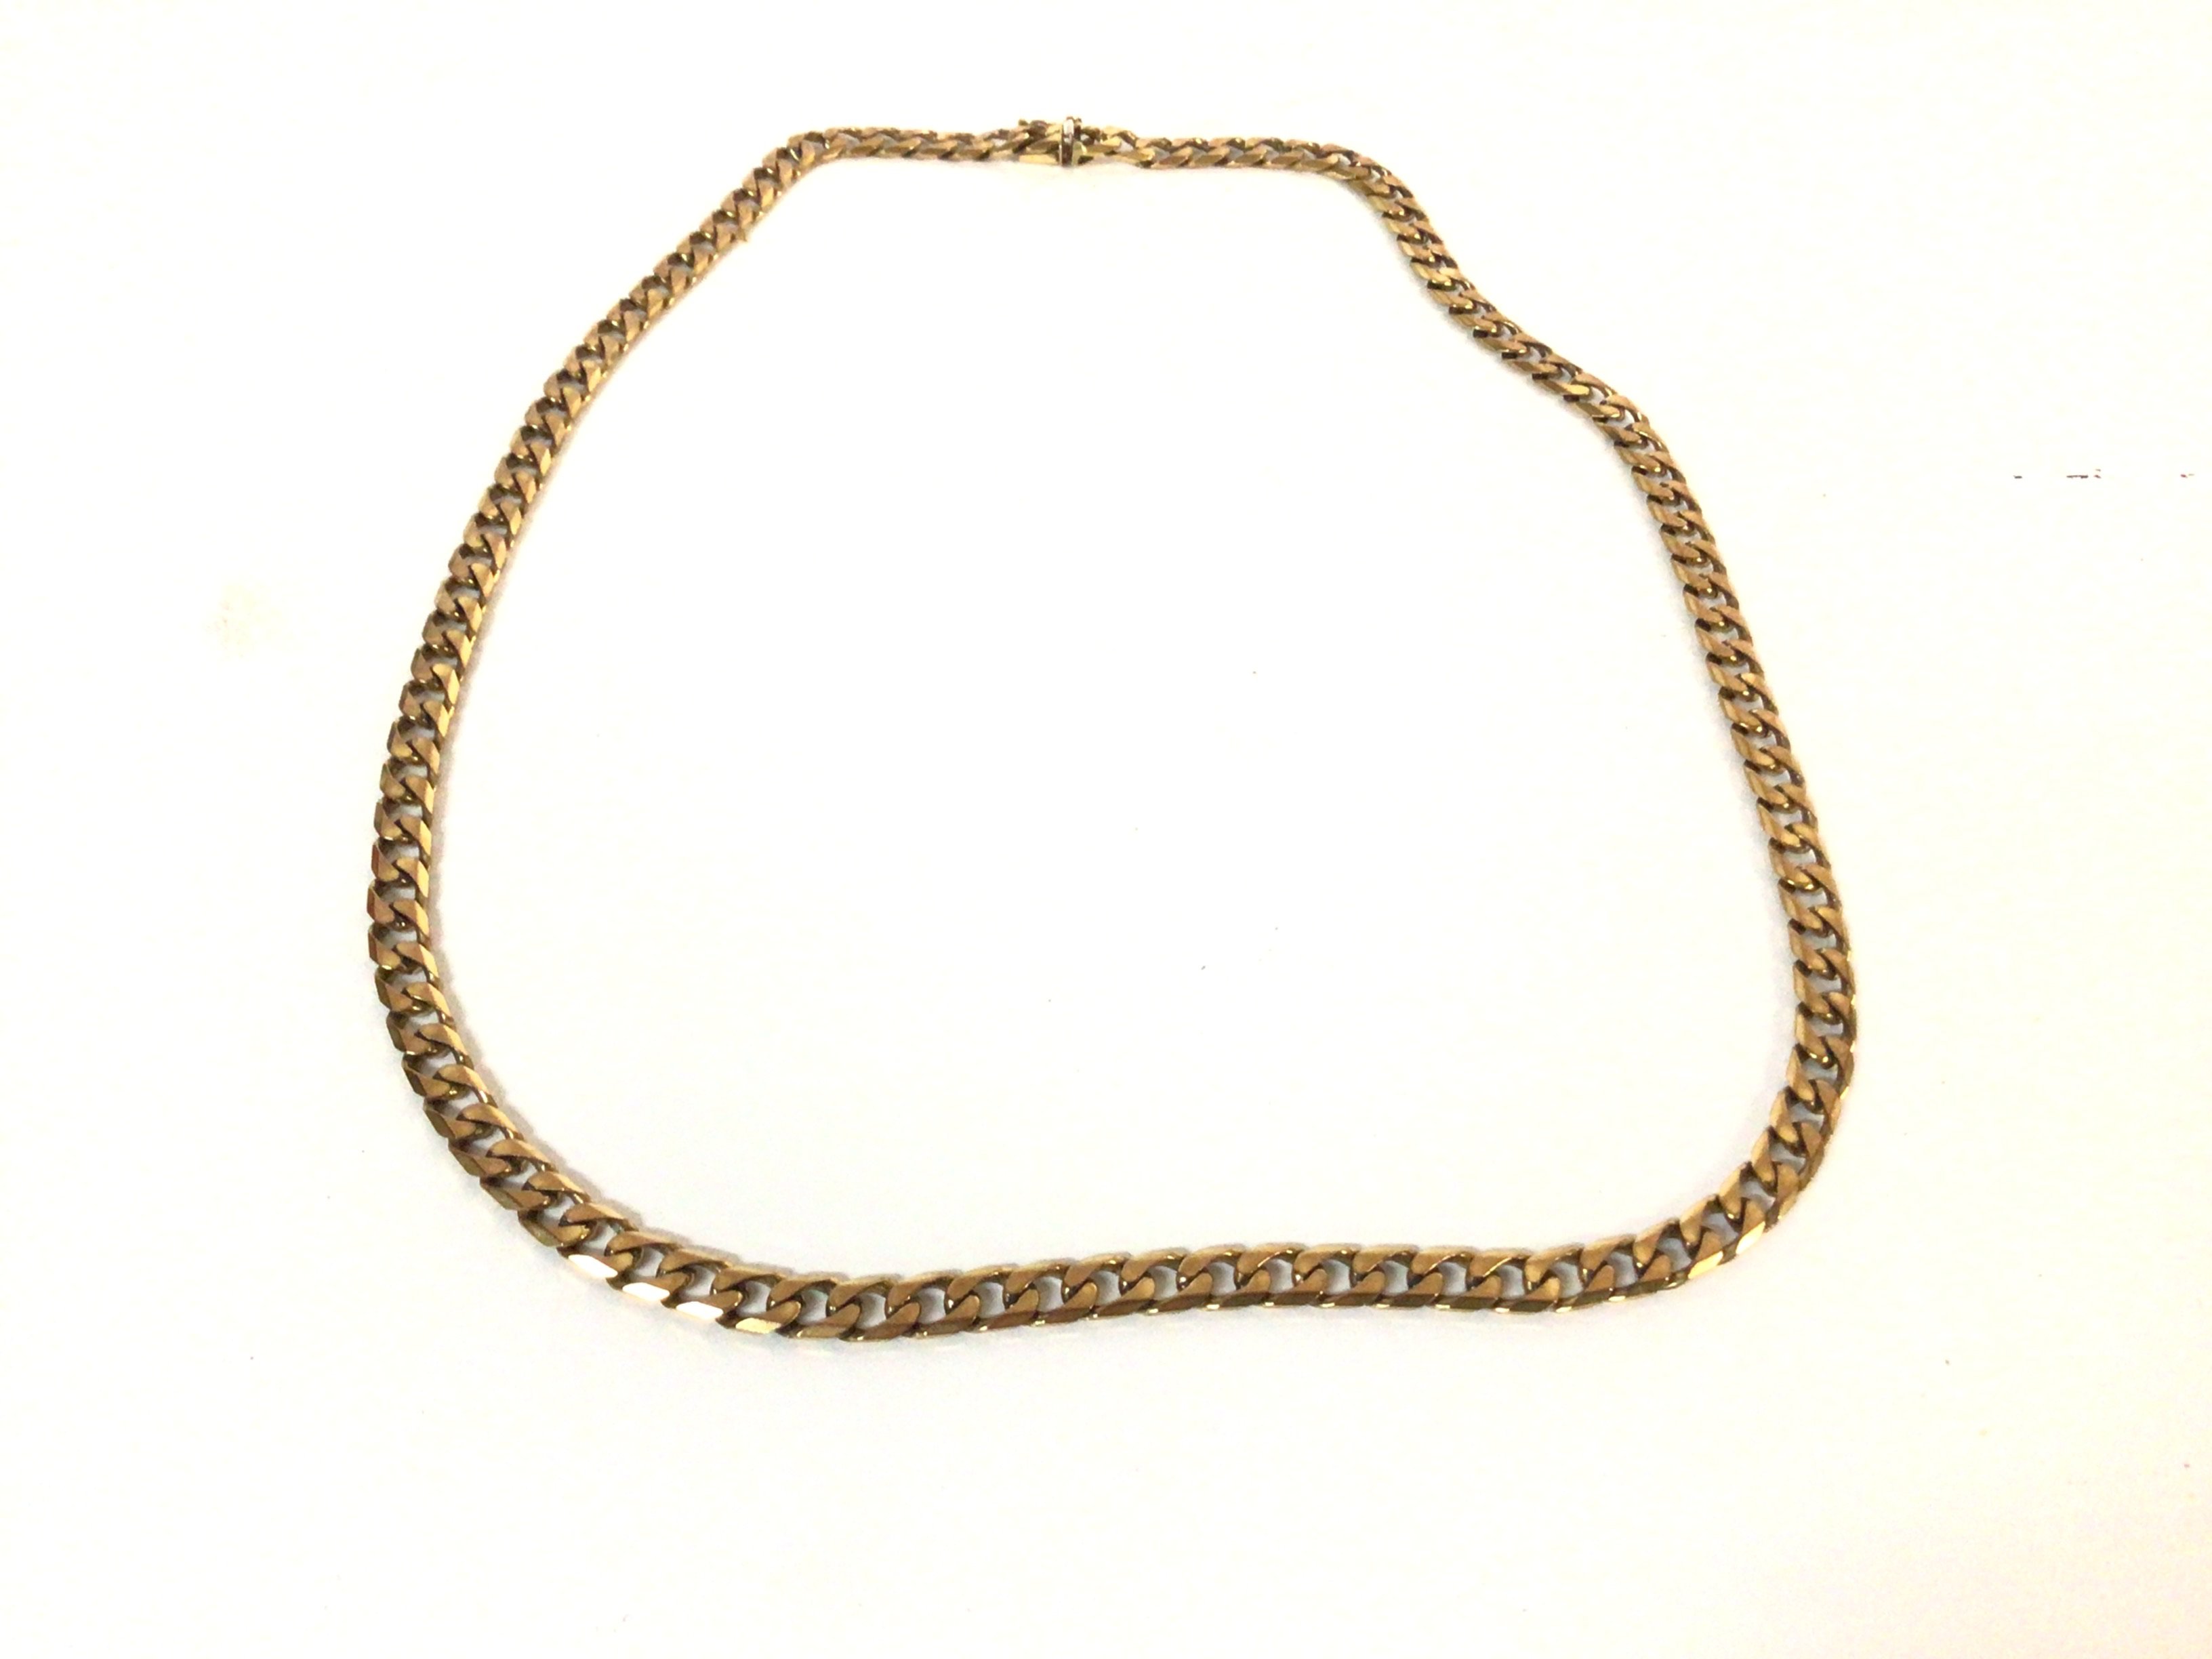 A 9ct gold cuban chain. Total weight 46.5g and 61c